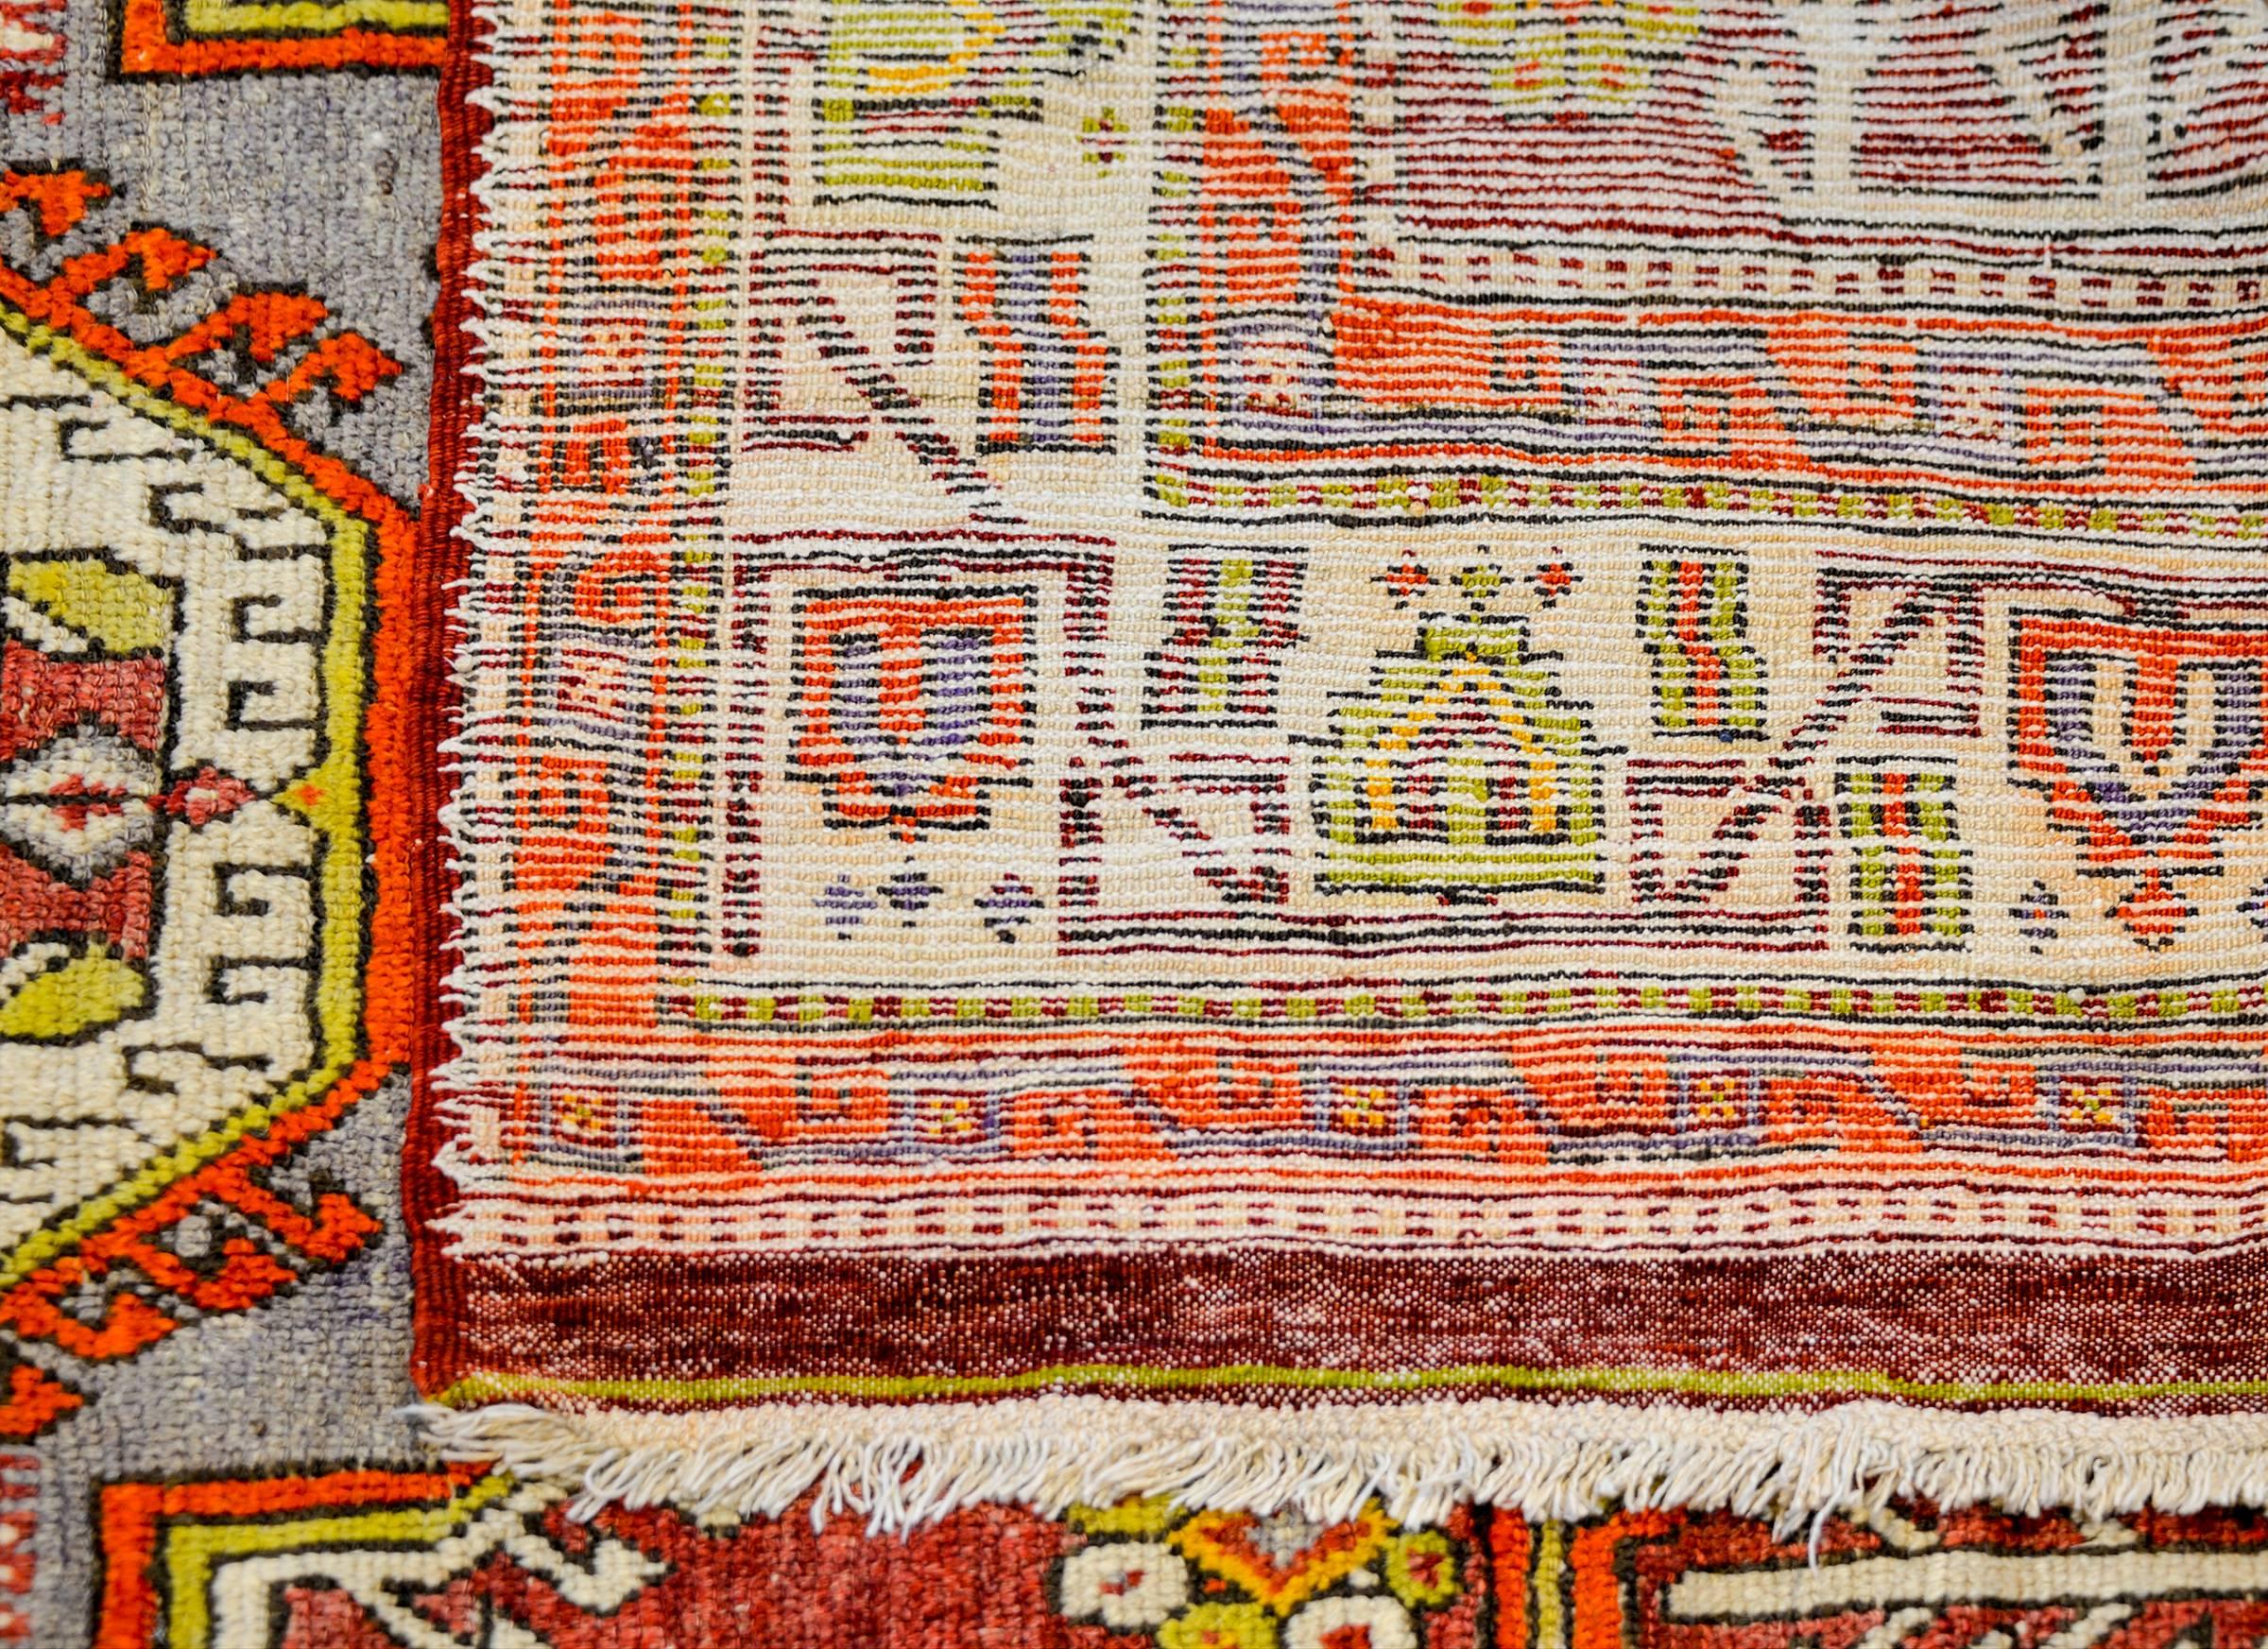 A wonderful vintage Turkish Konya rug a tribal pattern of diamond medallions woven in brilliant crimson, gold, orange, and white vegetable dyed wool, surrounded by similarly patterned and colored borders.